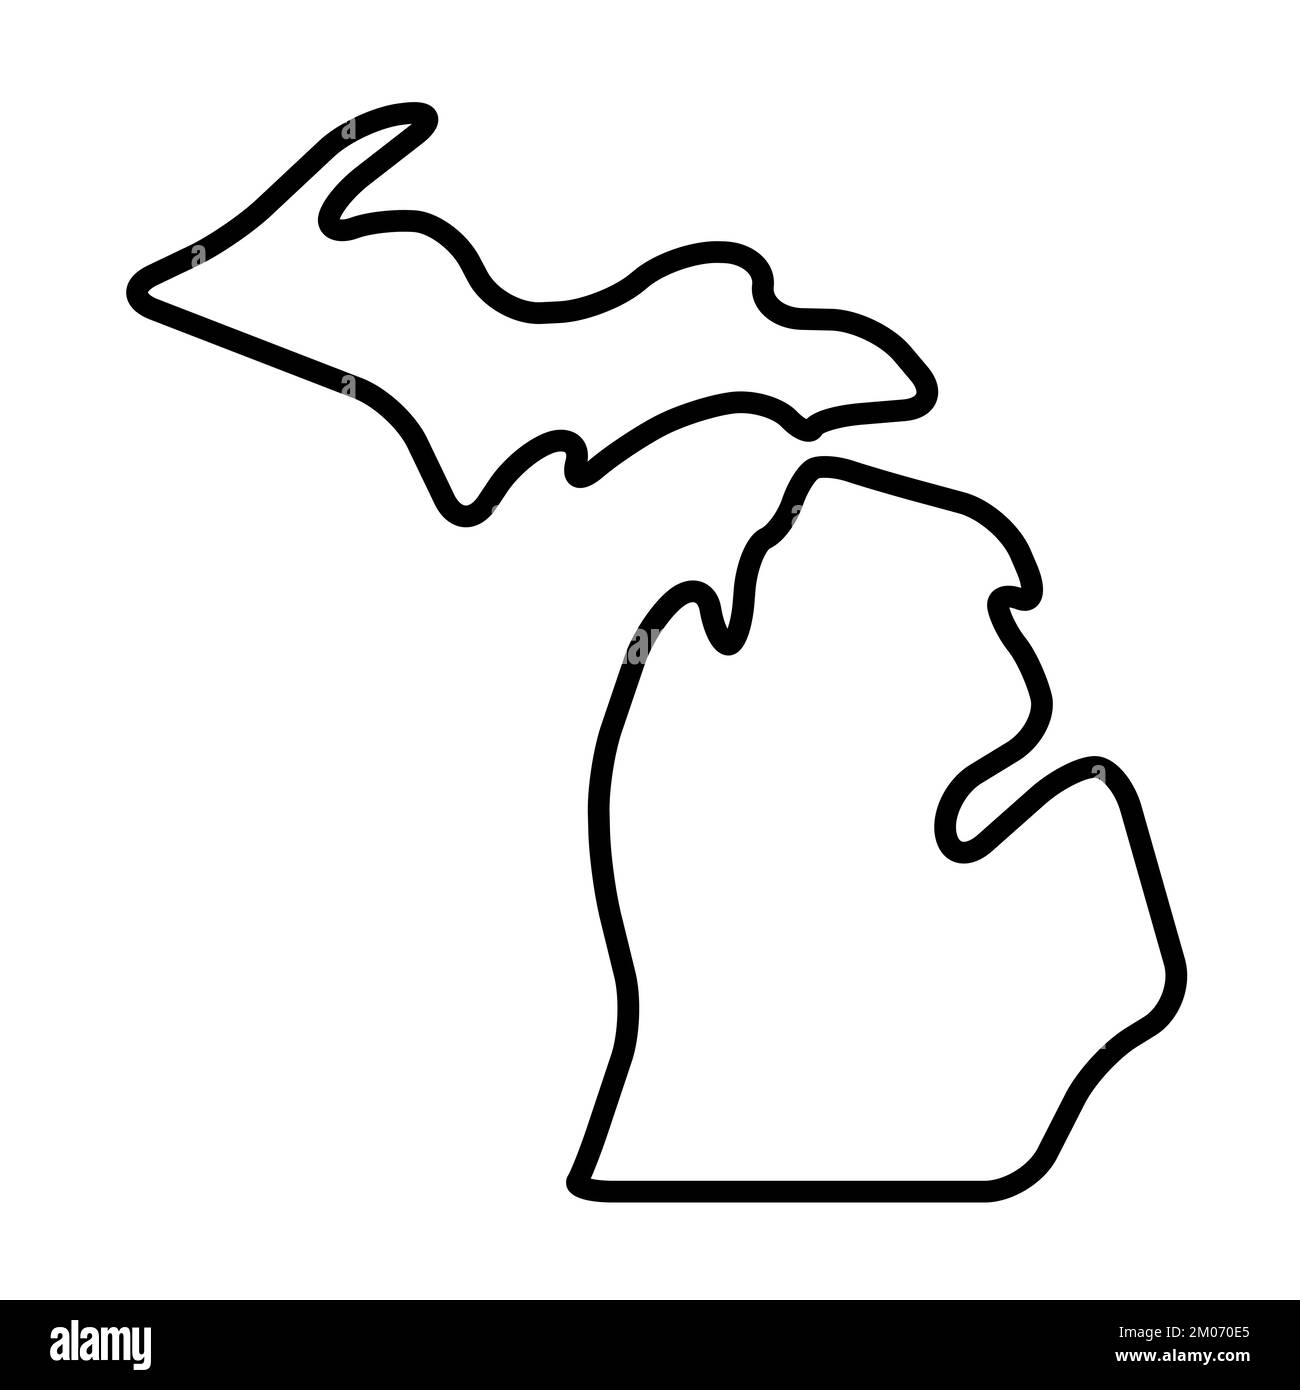 Michigan state of United States of America, USA. Simplified thick black outline map with rounded corners. Simple flat vector illustration Stock Vector